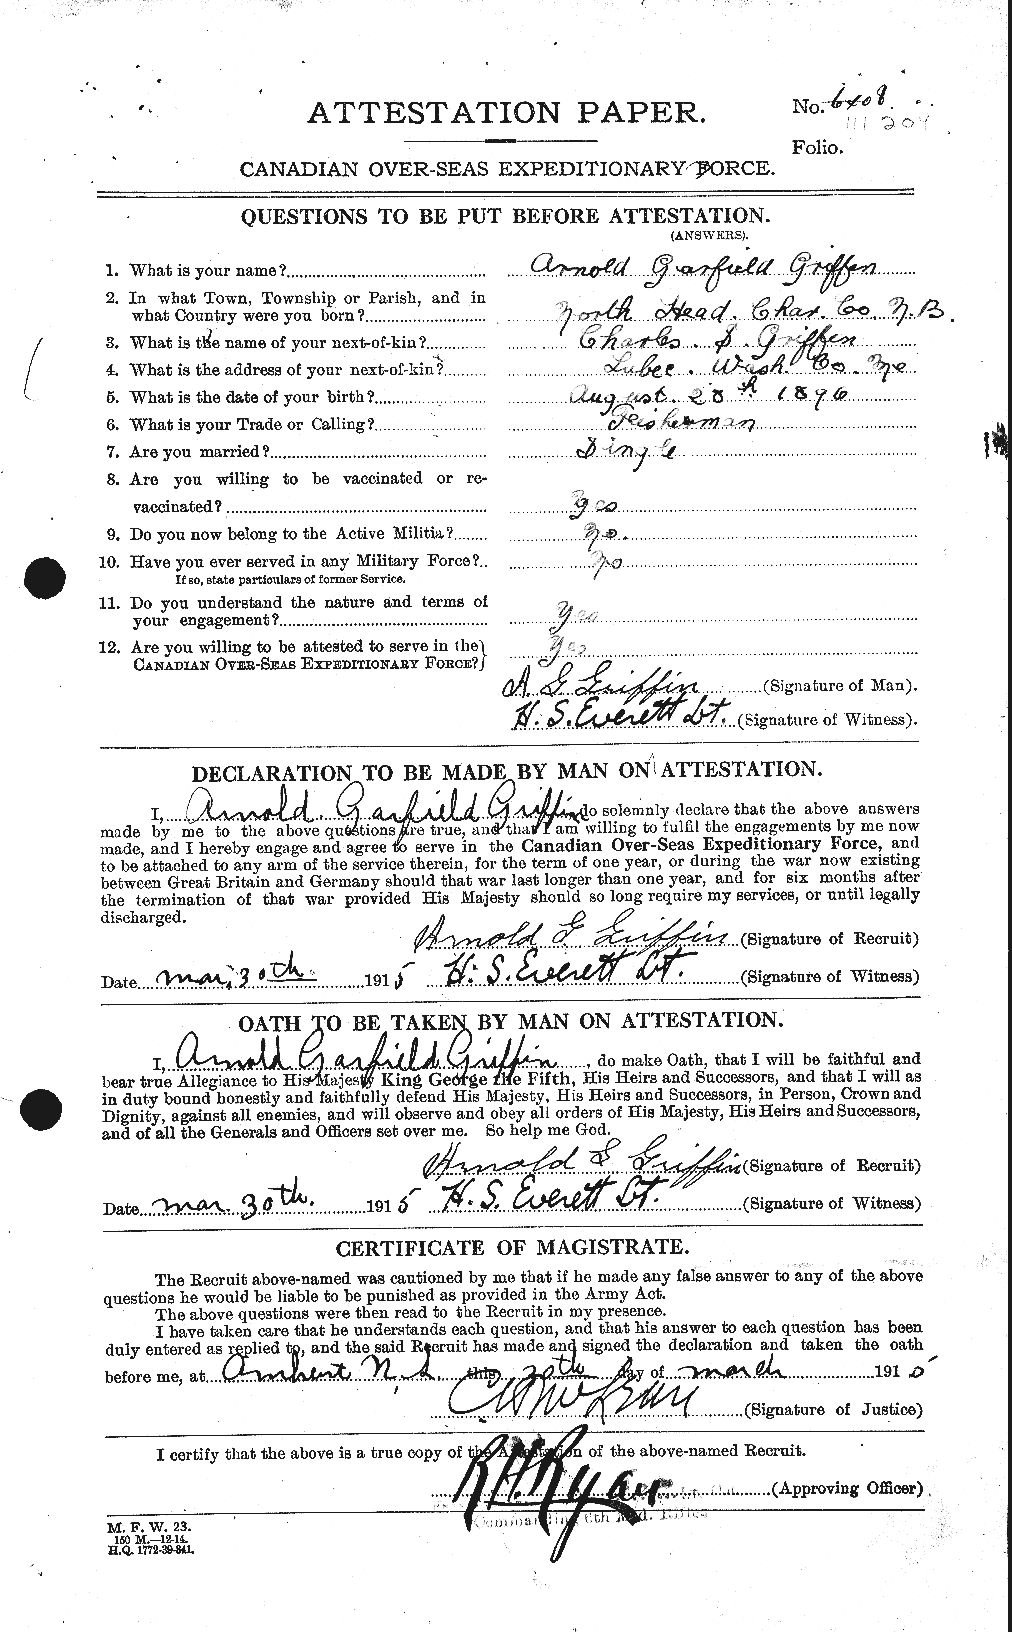 Personnel Records of the First World War - CEF 364948a